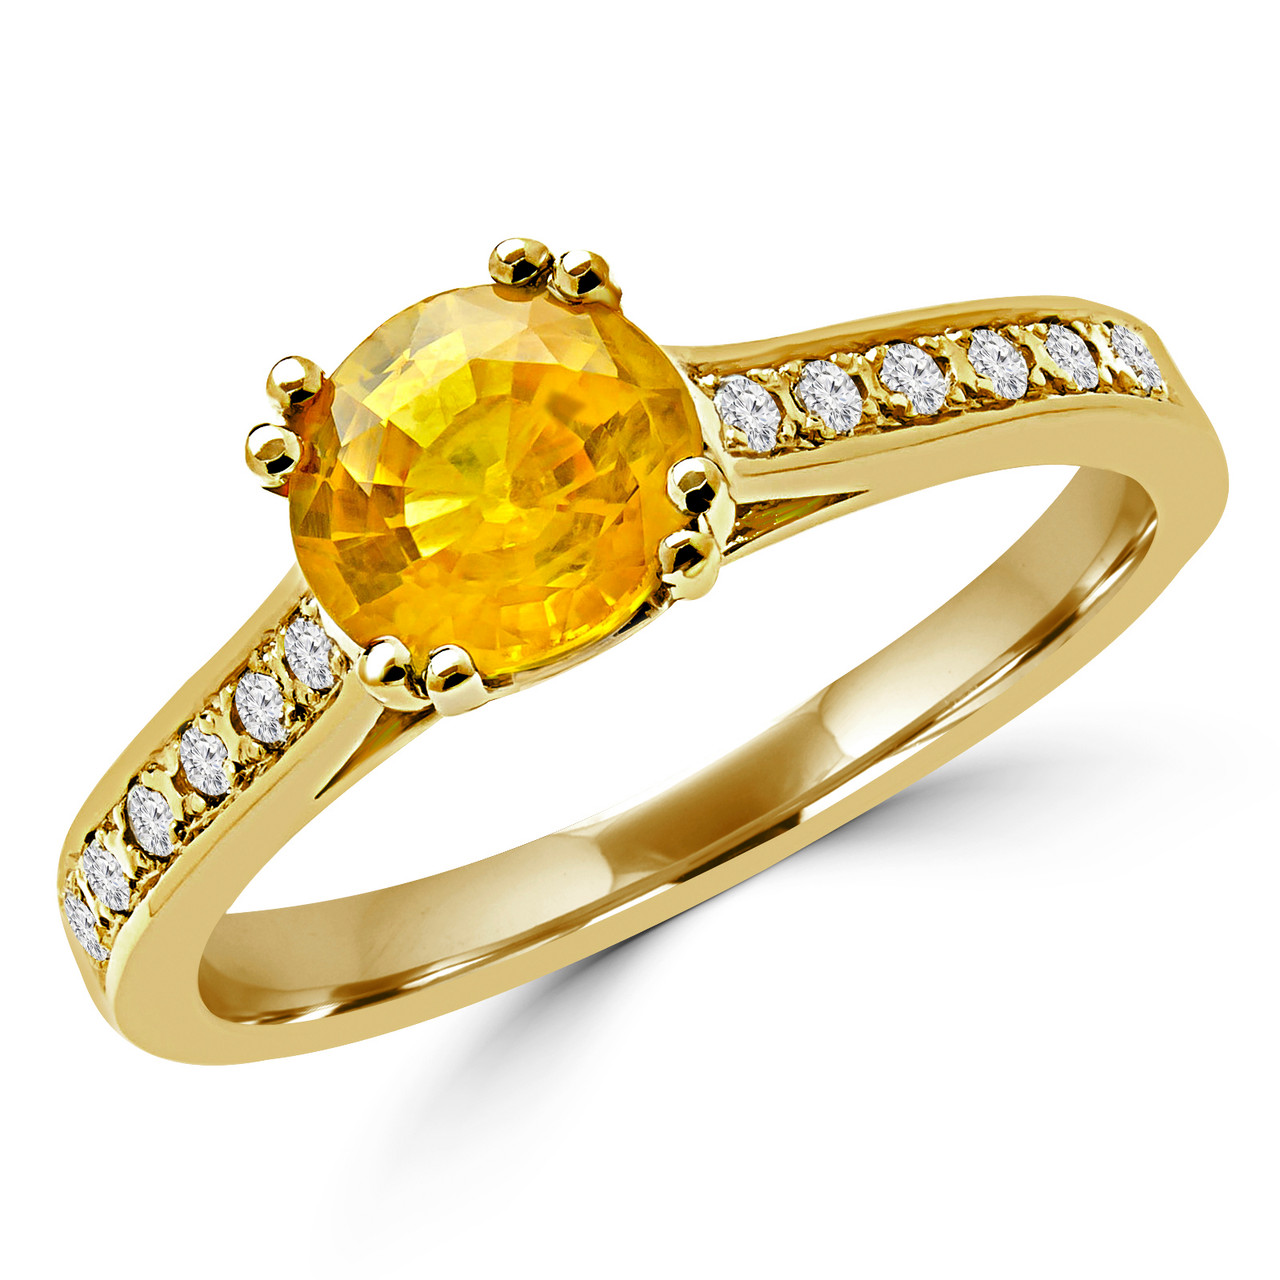 Buy RRVGEM YELLOW SAPPHIRE RING Pukhraj Gemstone Gold Plated Ring  Adjustable Ring 7.00 Carat NATURAL Yellow Sapphire RING For Men And Women  By LAB -CERTIF at Amazon.in